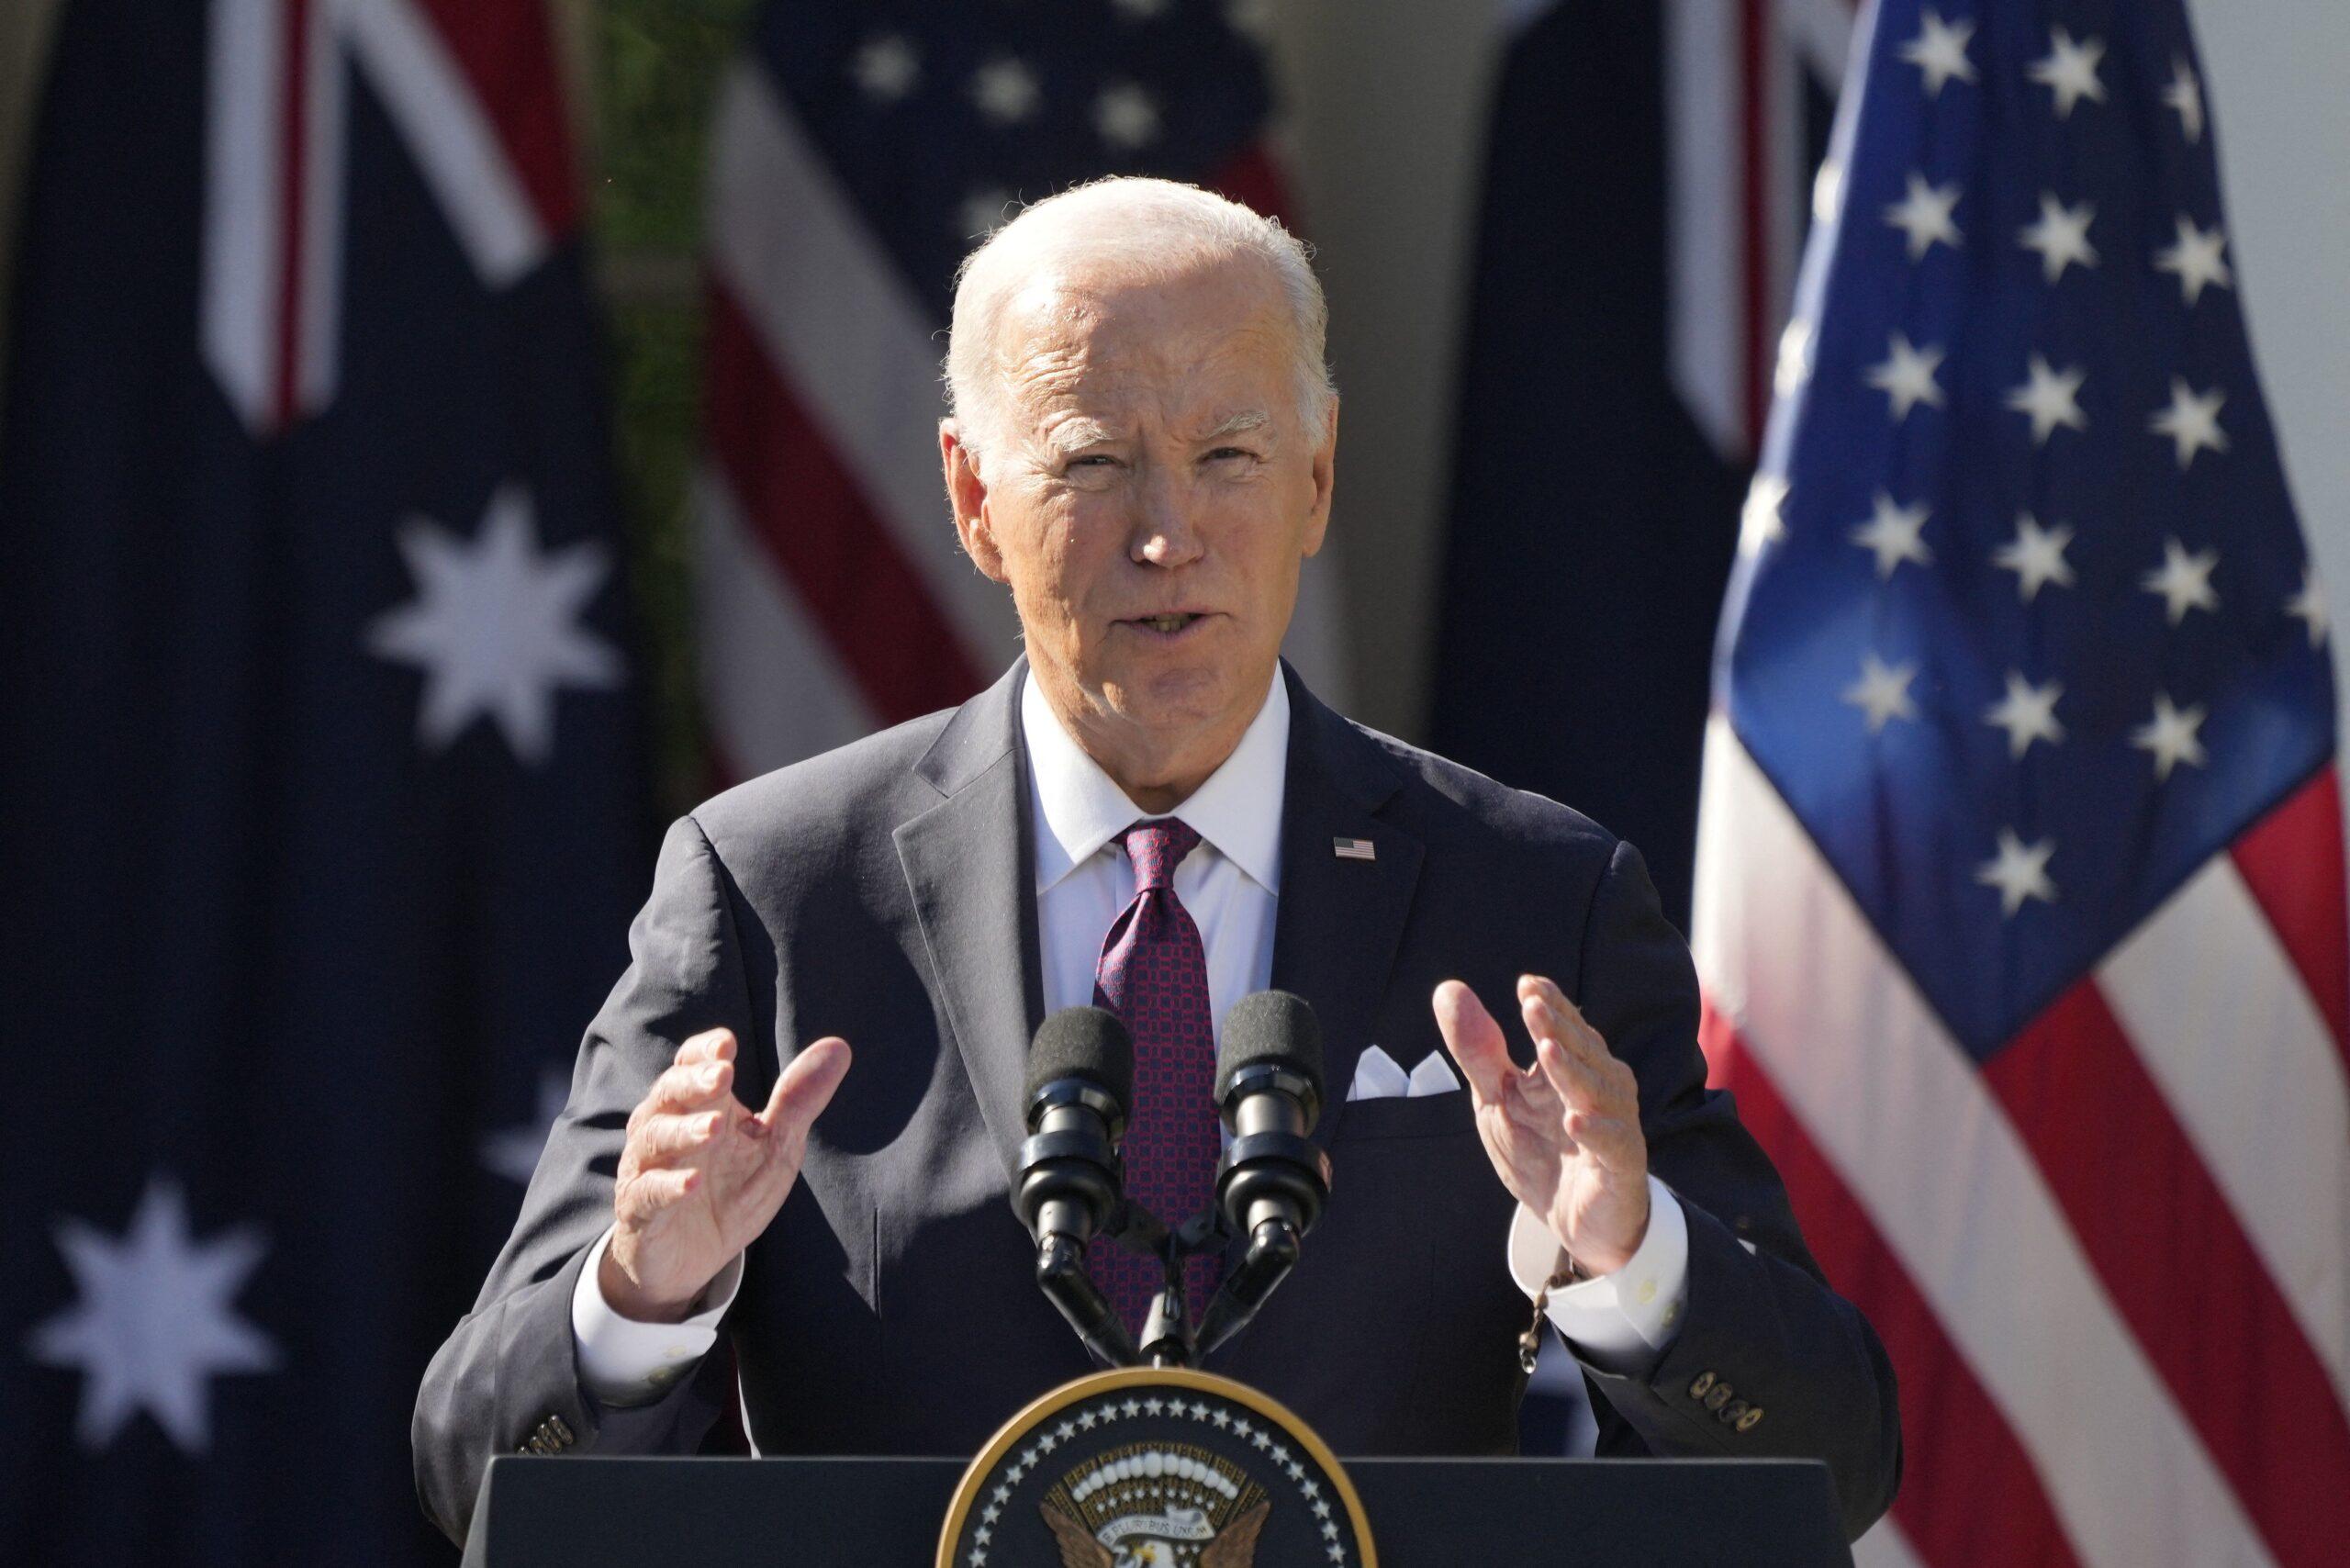 Citizens Are FED UP With Joe Biden Amid 'Pathetic' Viral Video